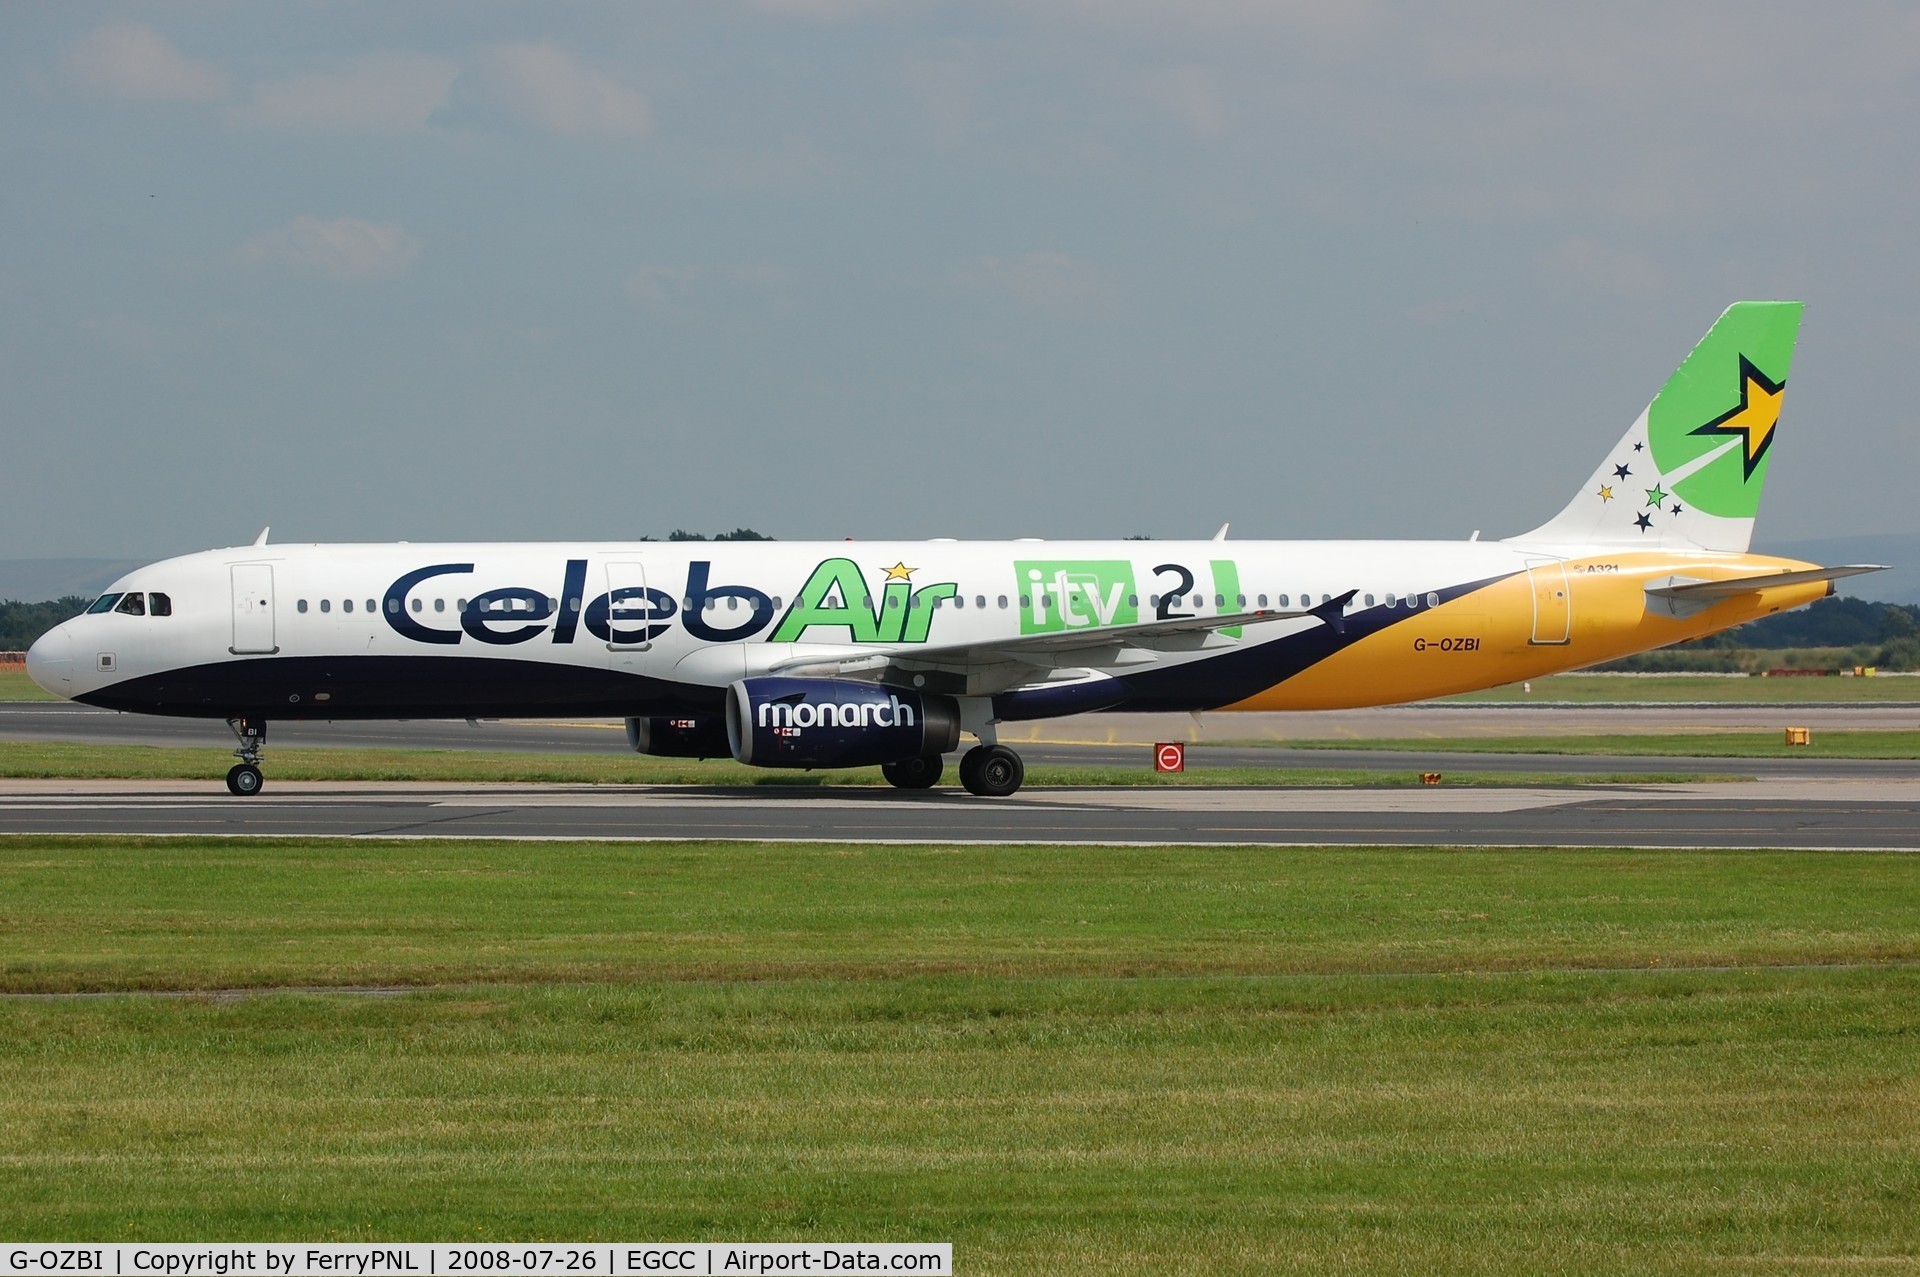 G-OZBI, 2007 Airbus A321-231 C/N 2234, Monarch A321 with ITV adds